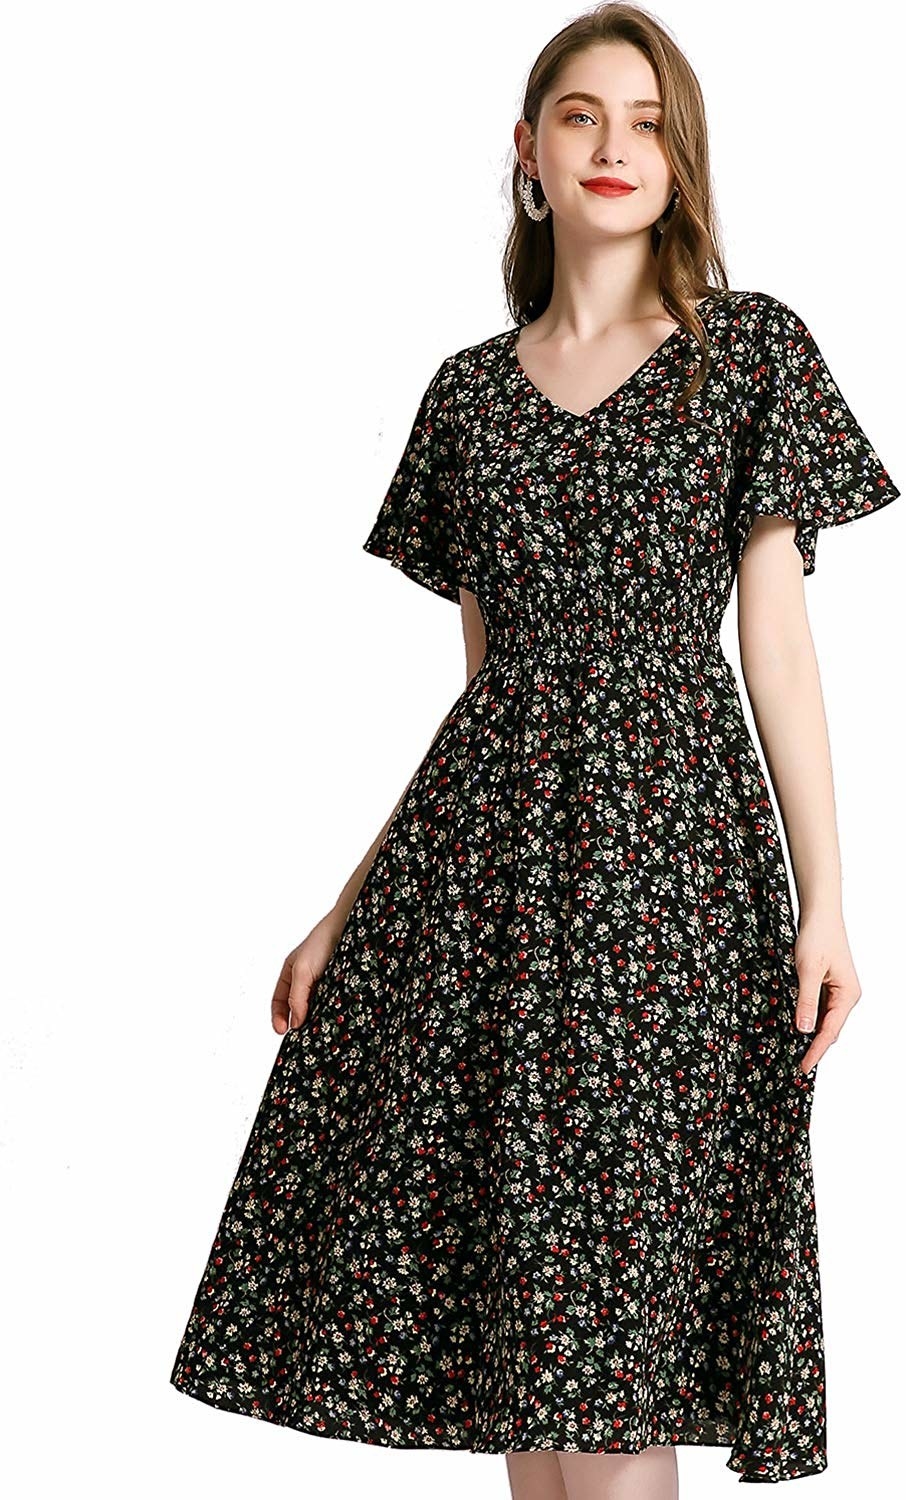 23 Beautiful Dresses You Can Get On Amazon For Under $20